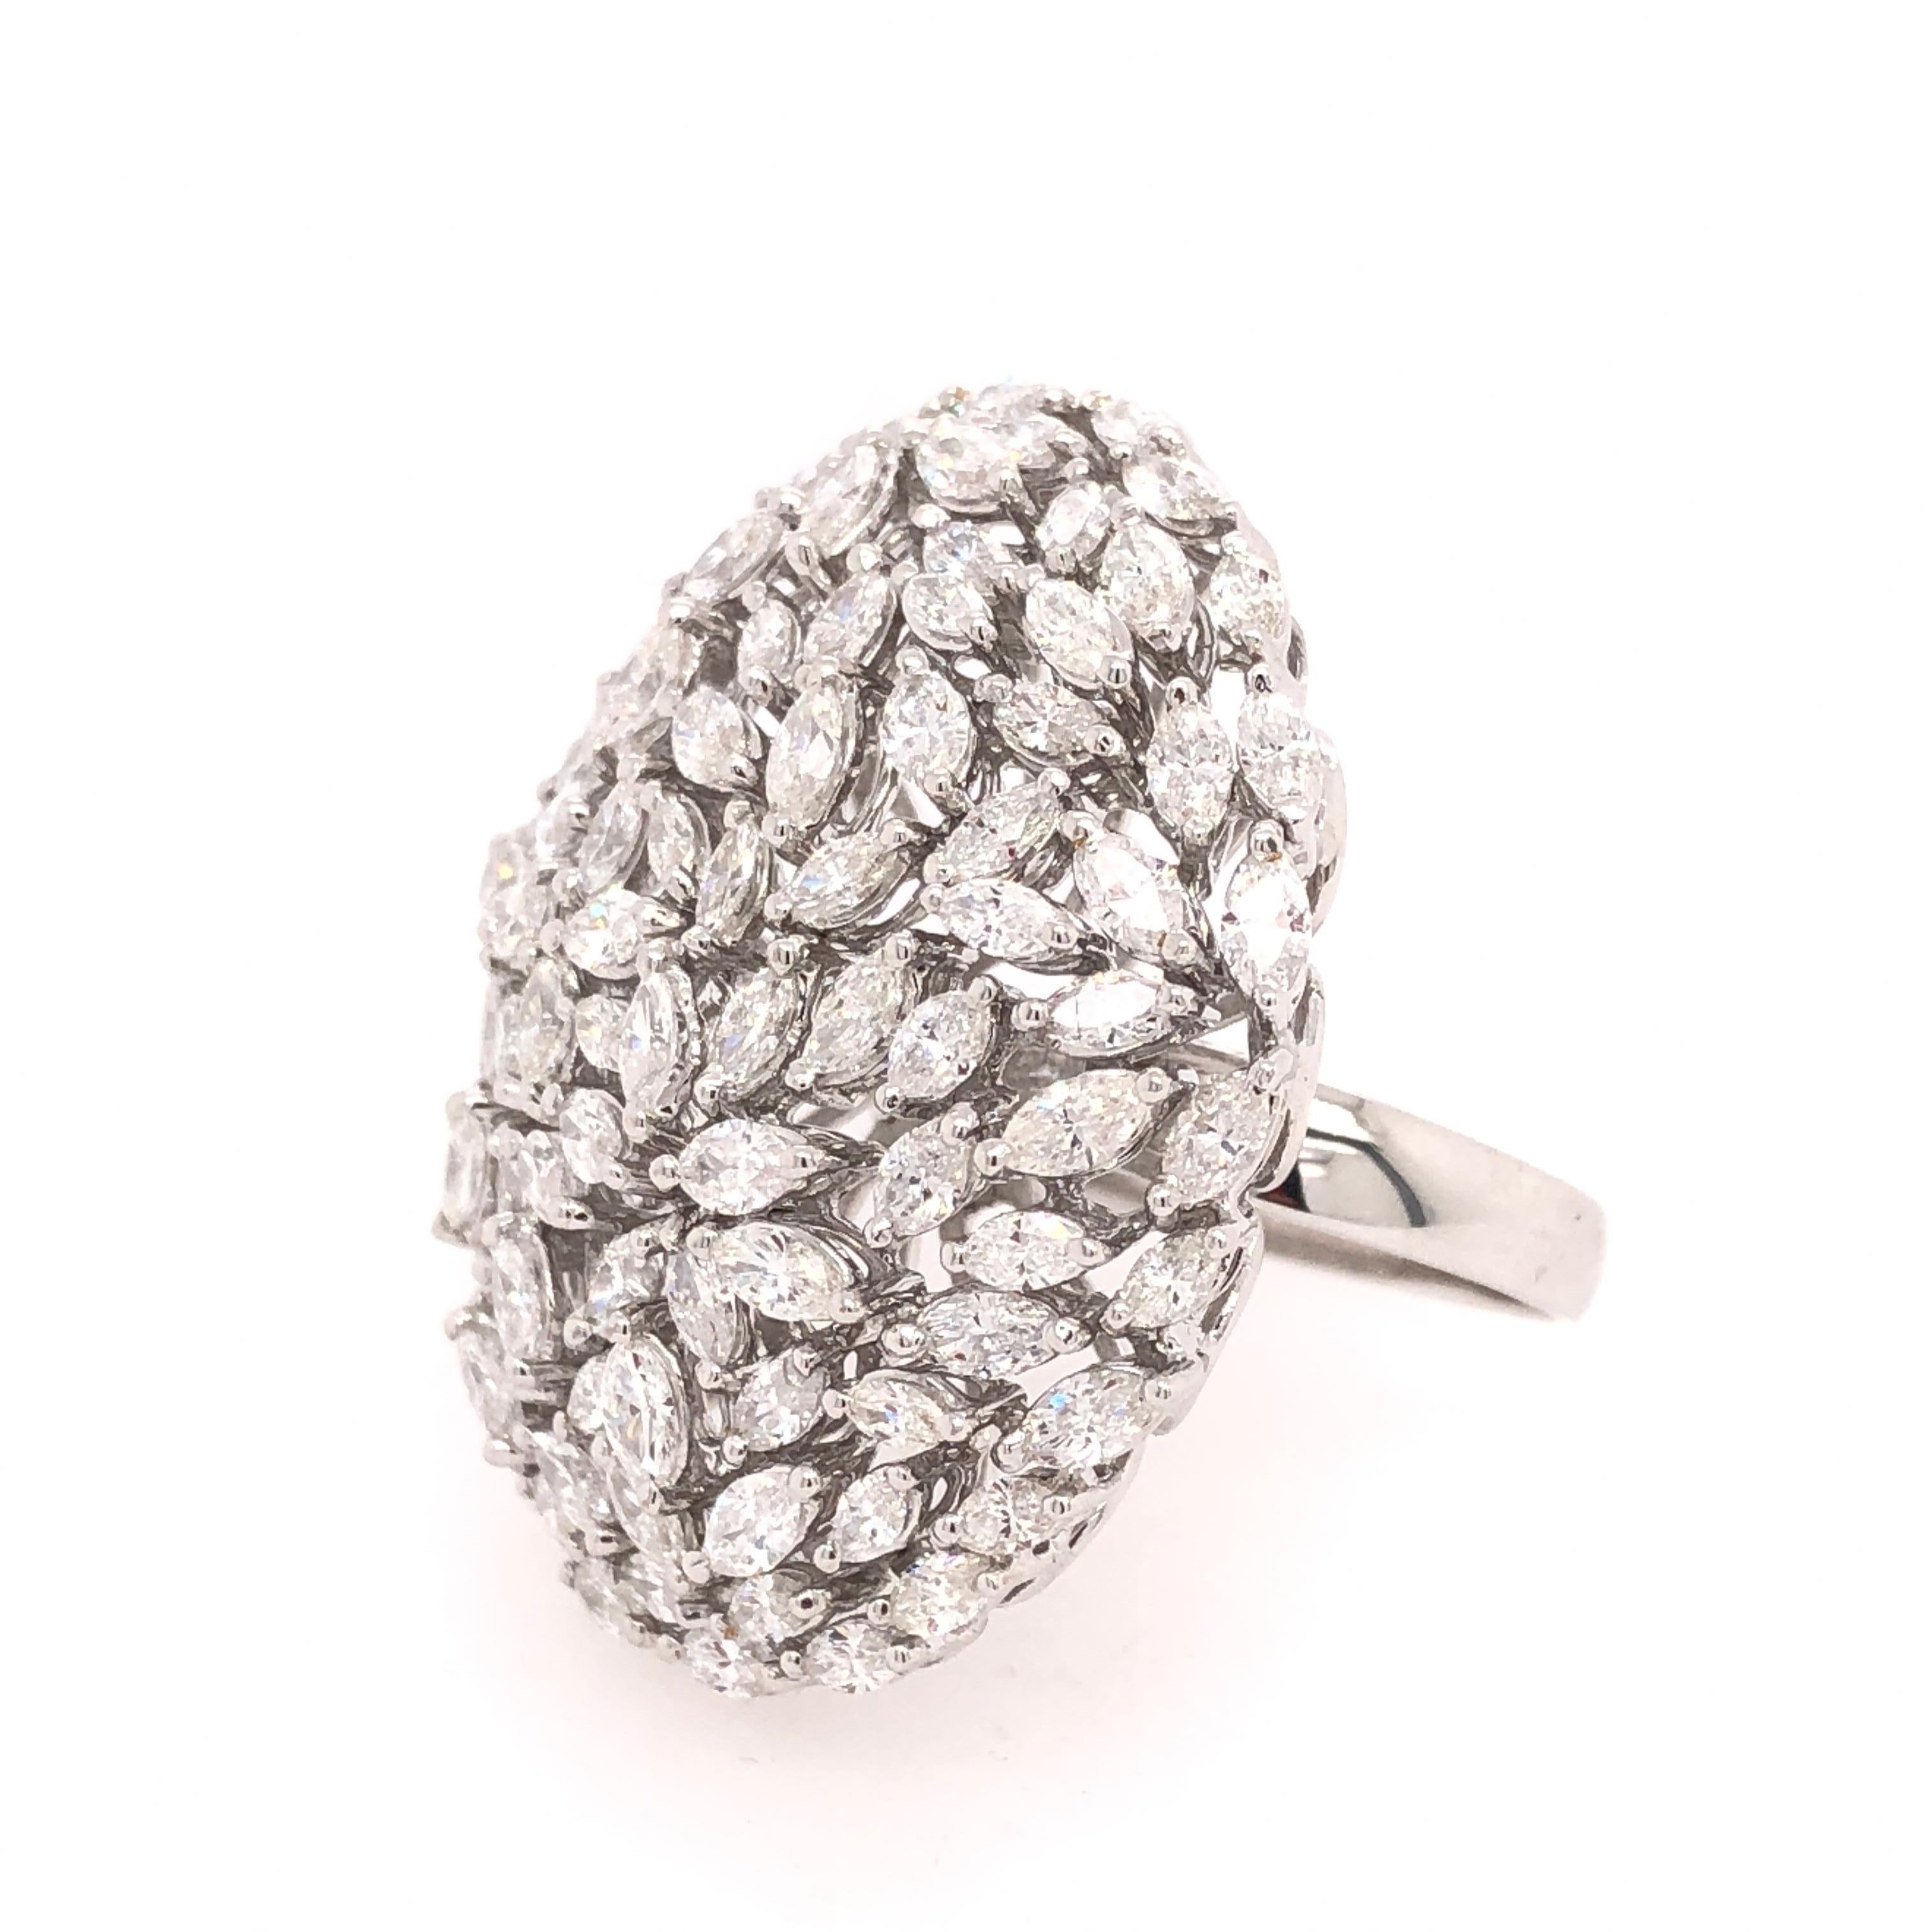 18K White Gold
Diamonds: 3.82ct total weight.
All diamonds are G-H/SI stones.
Height - is approximately 3.2cm/1.26inches.